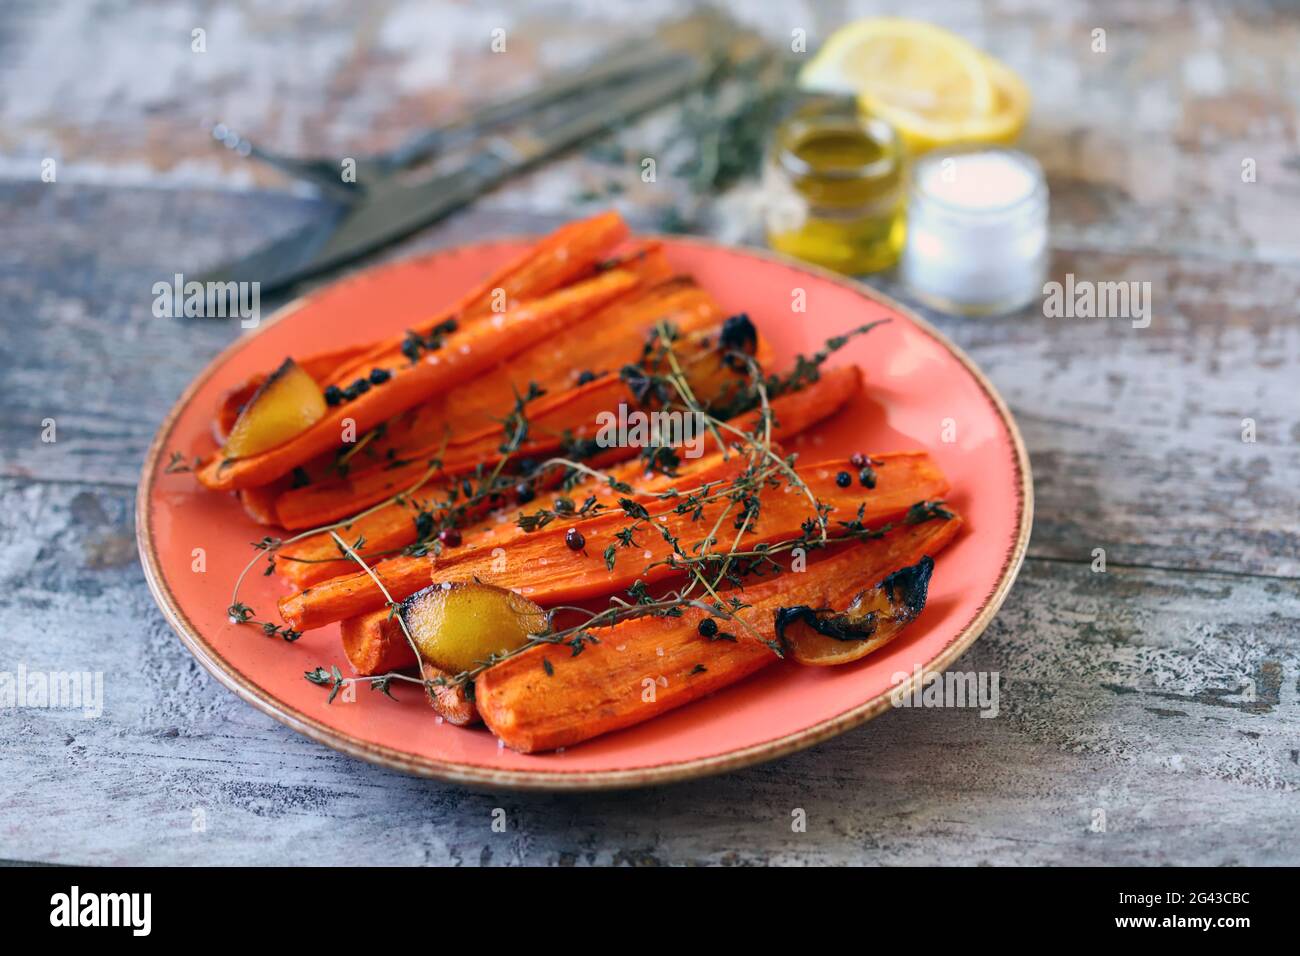 A plate with baked carrots. Baked carrots in strips with herbs and spices. Stock Photo